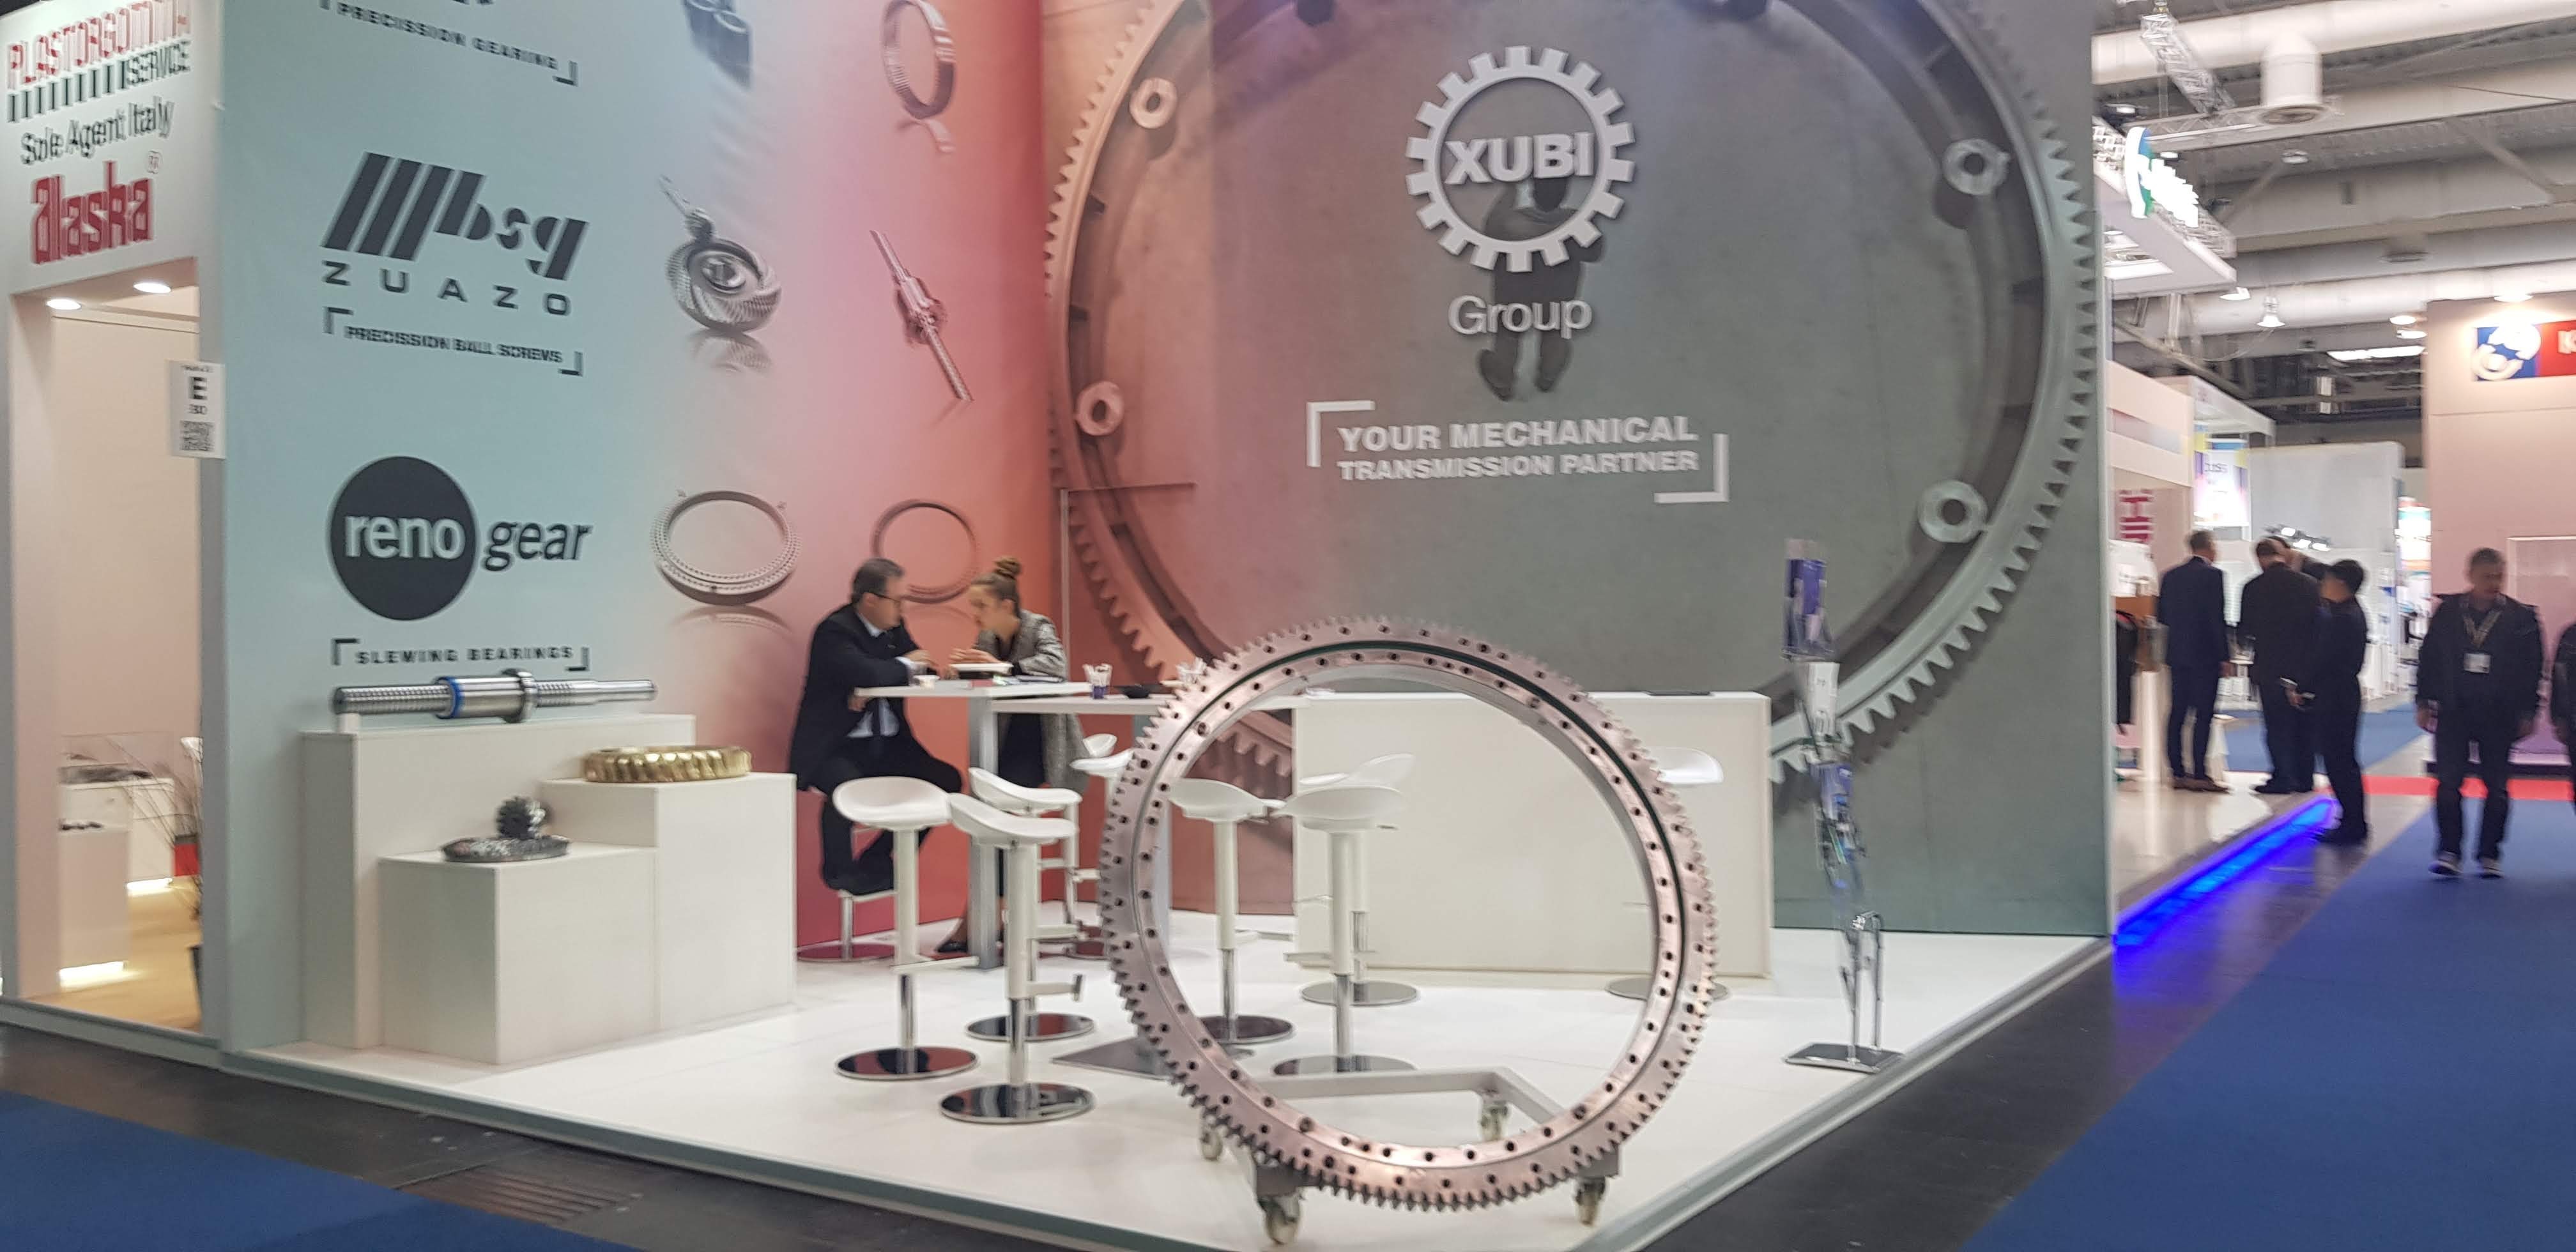 Xubi Group at the Hannover Messe 2019 trade fair